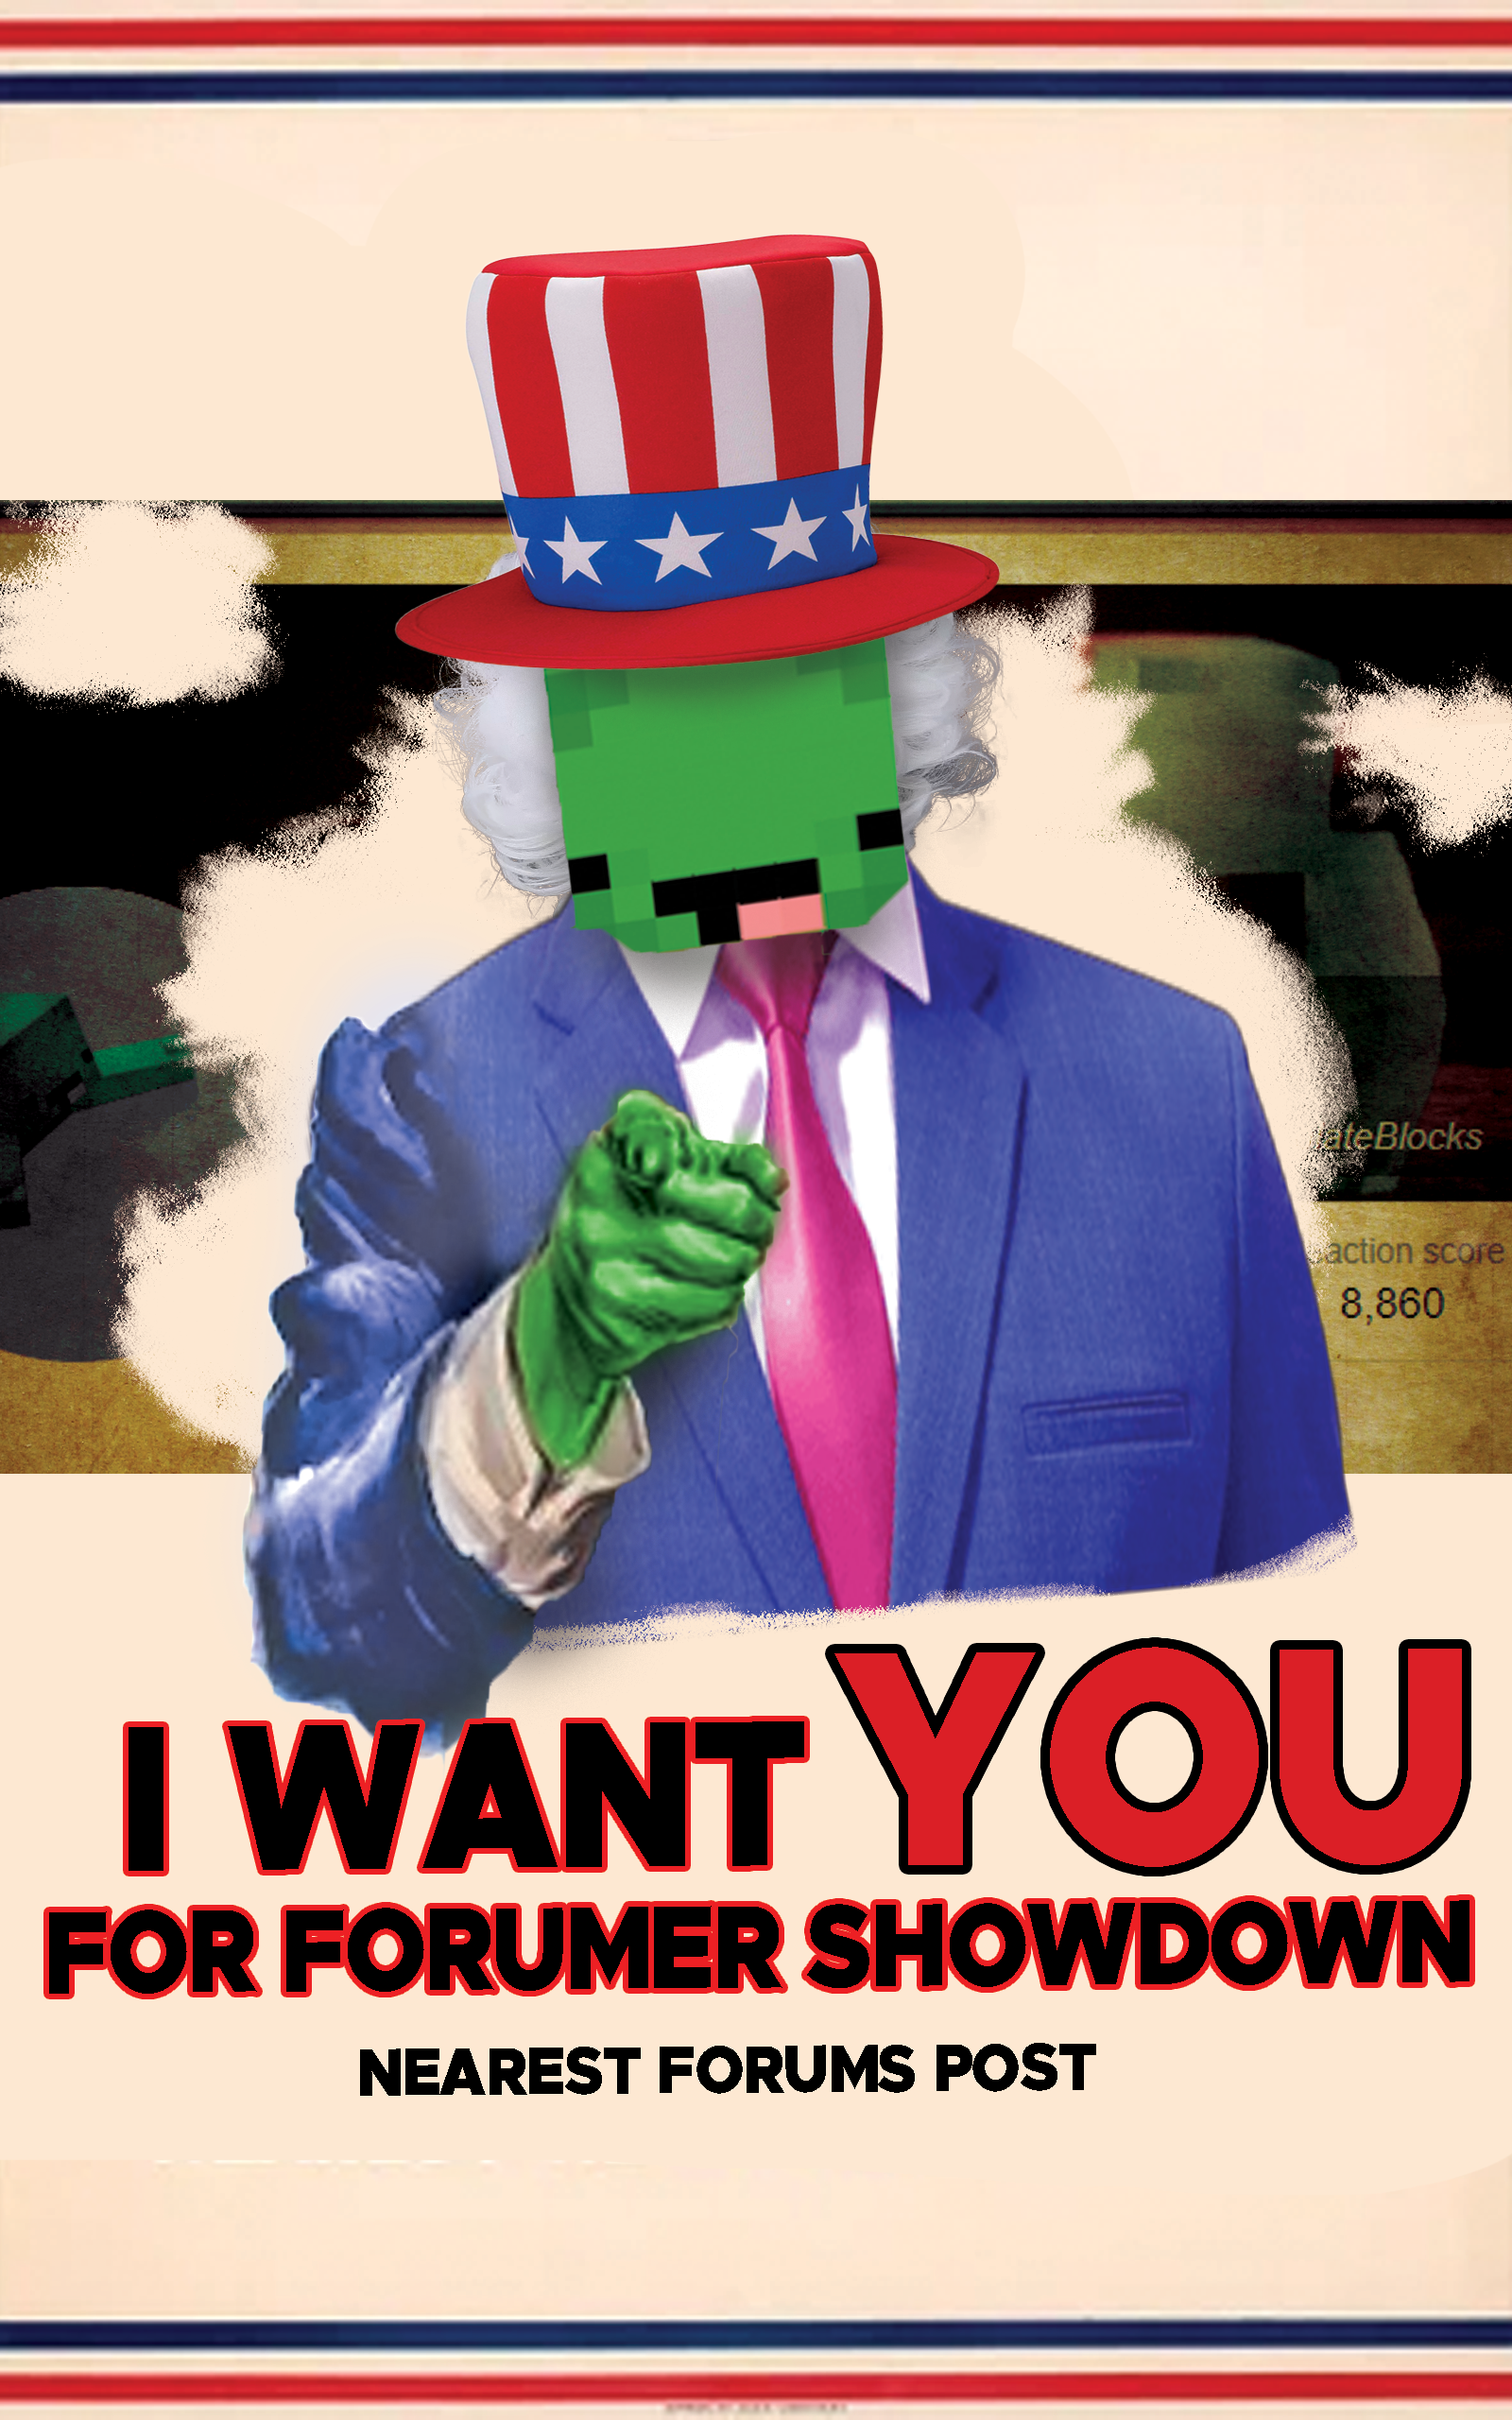 I want YOU for forumershowdown poster.png